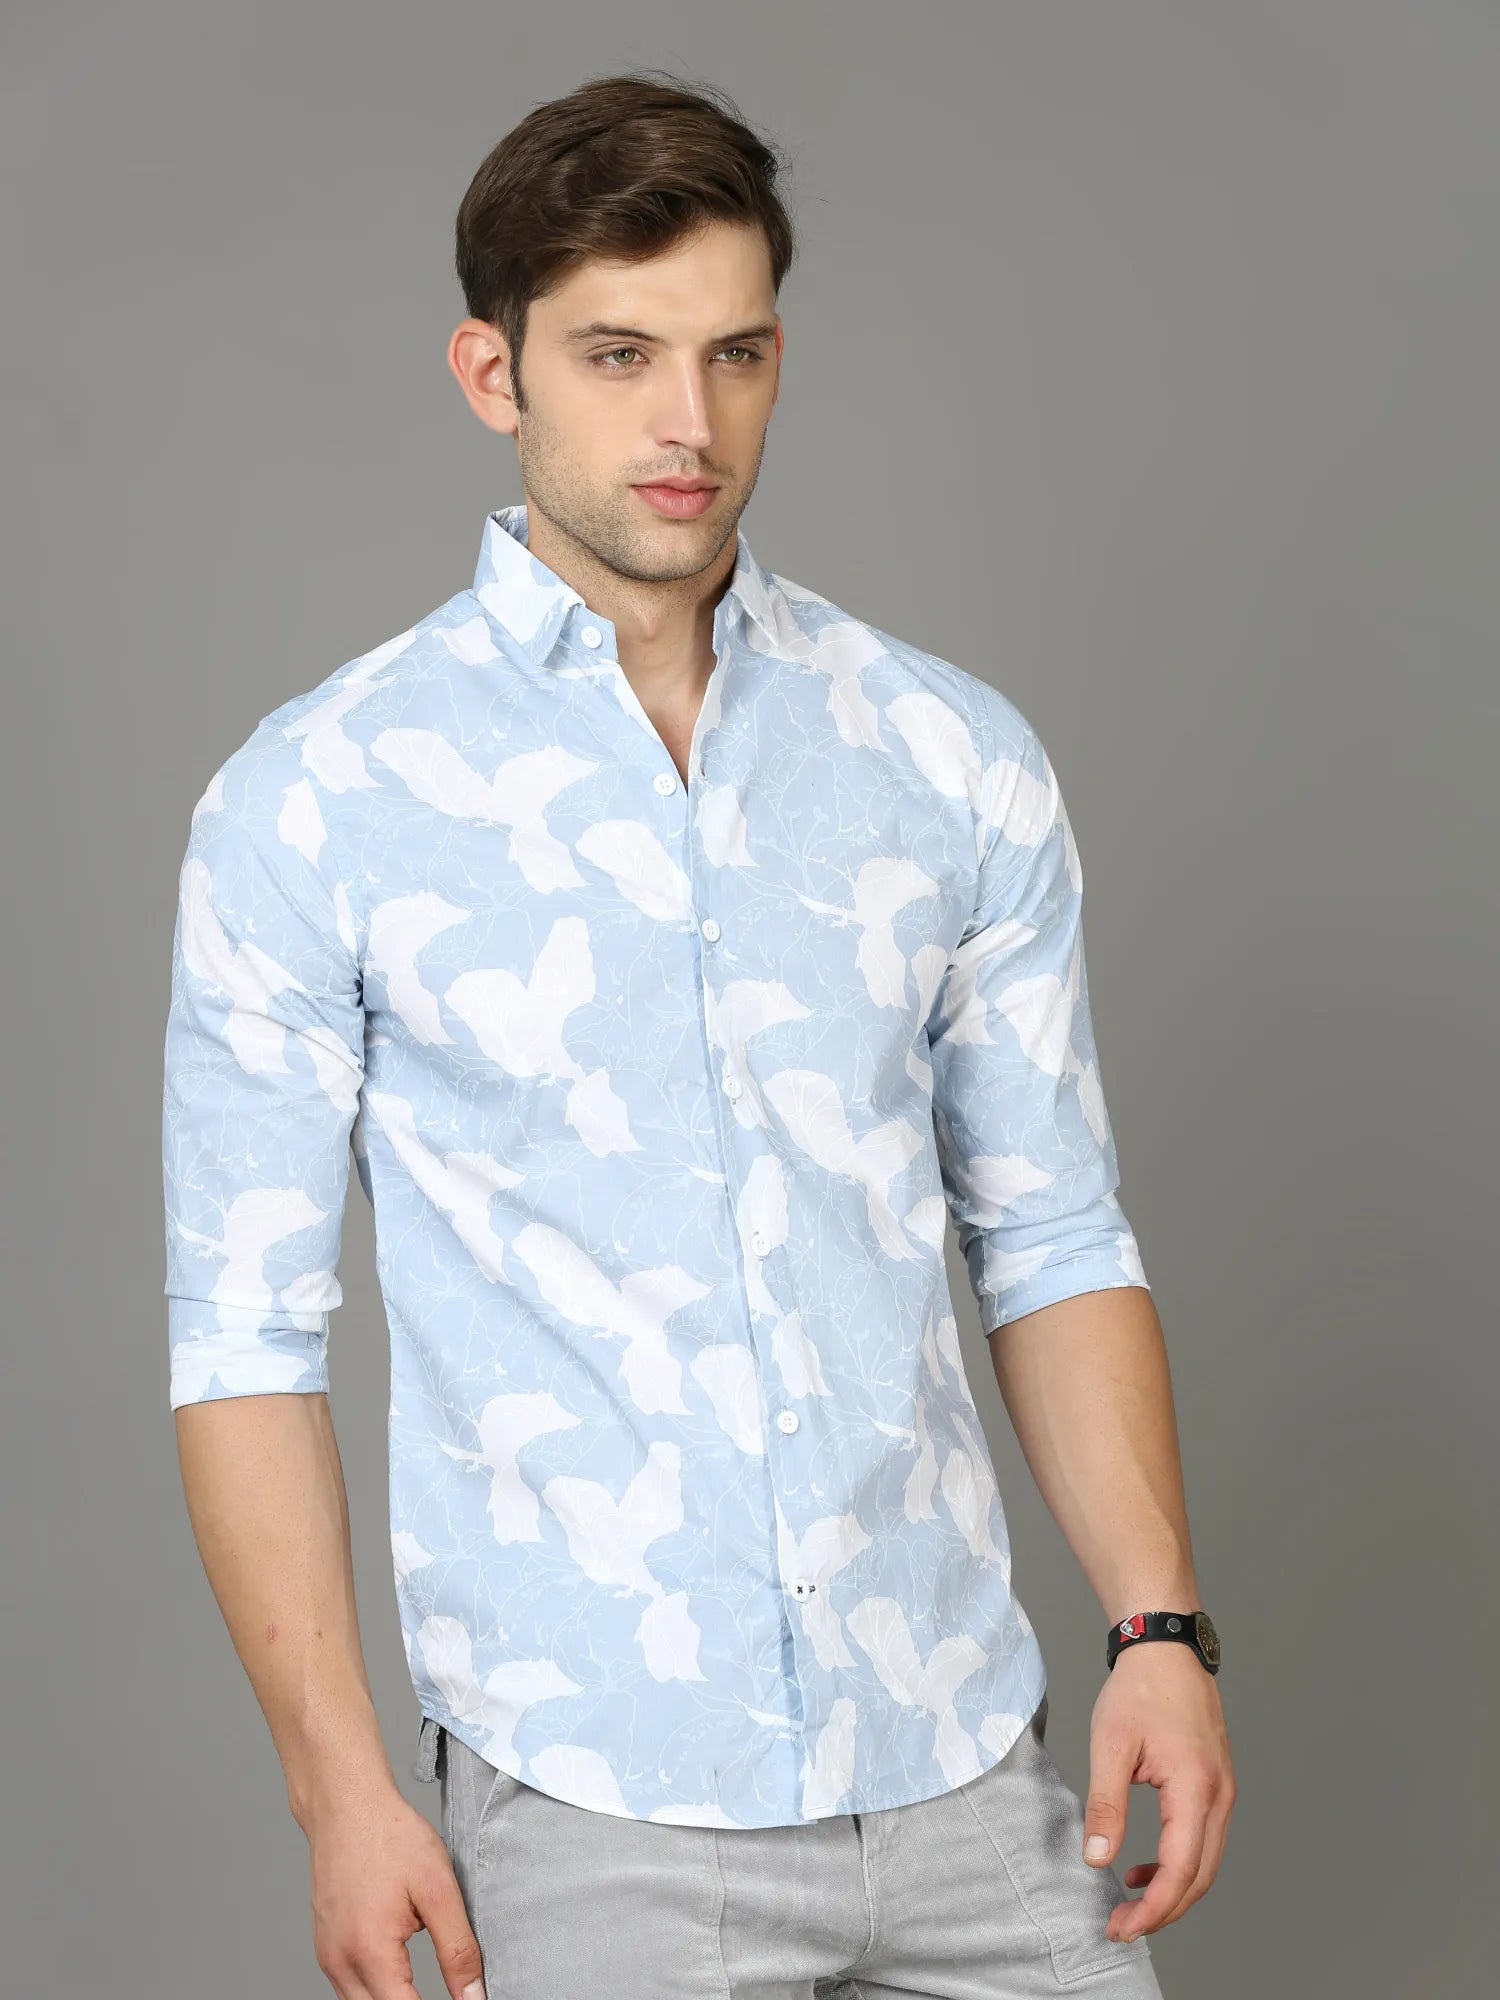 Bold Graphic Printed Shirt for Men 